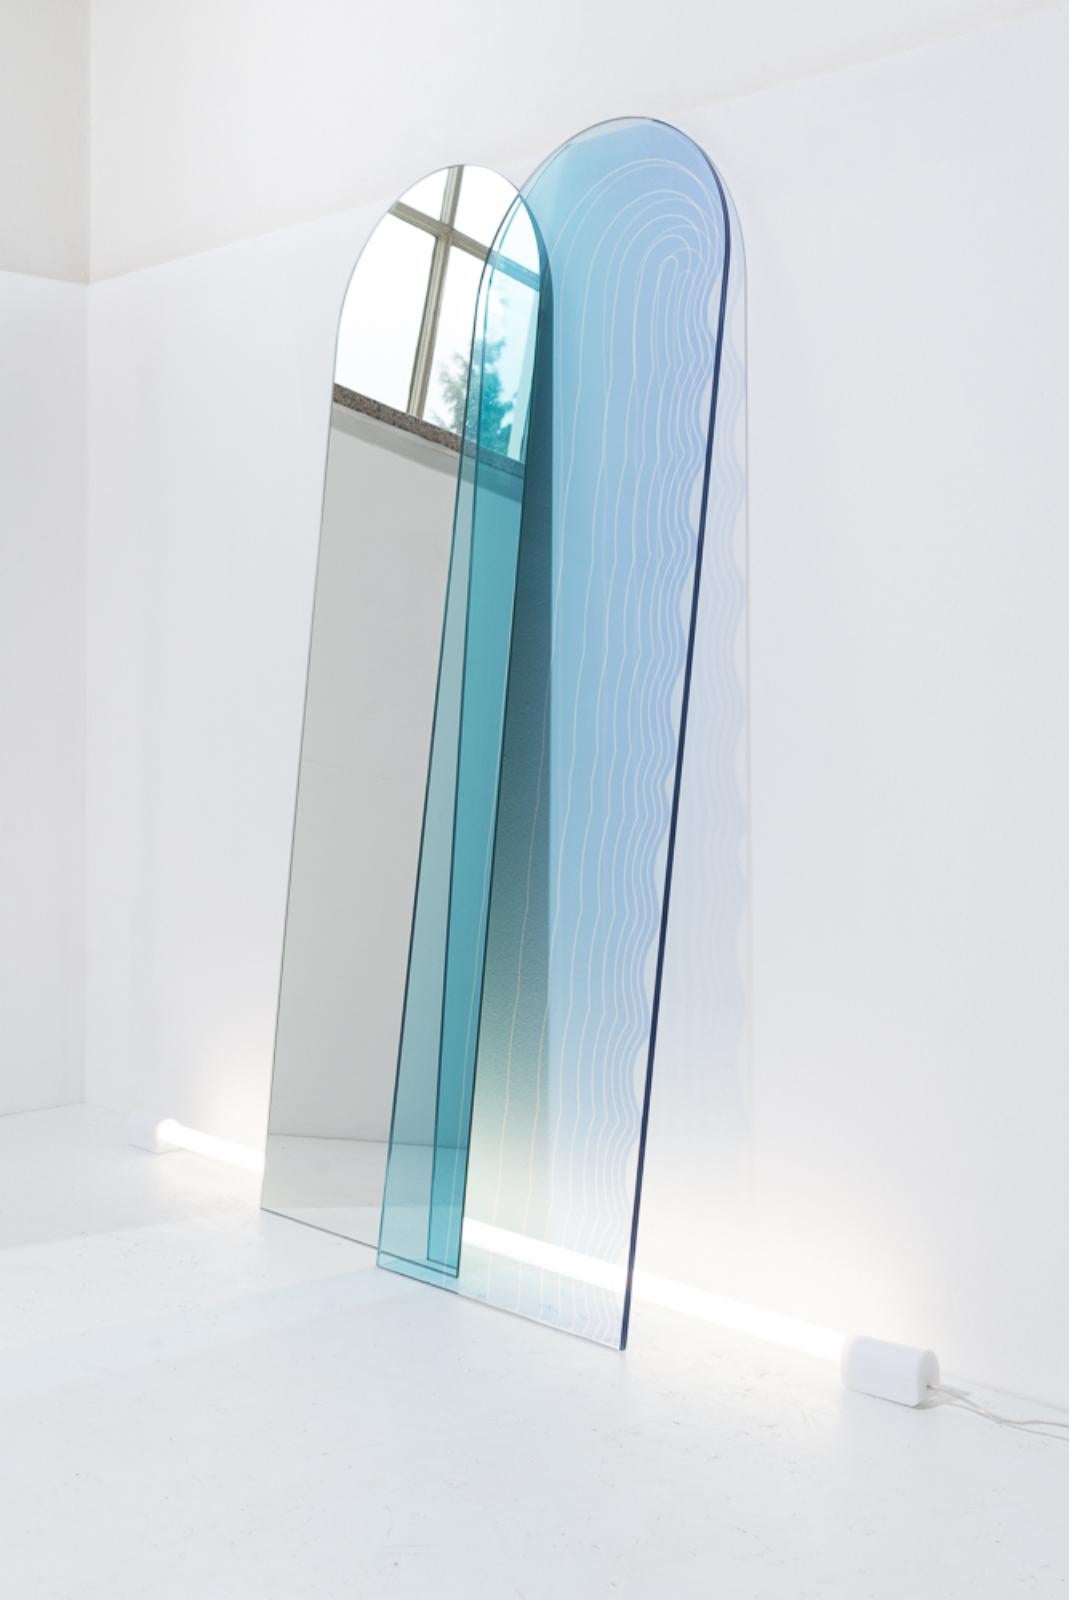 Set of Wave infinity glass panel and mirror by Studio Thier & van Daalen
Dimensions: W 35 x D 1 x H 120 cm
Materials: Laminated and Hardened Glass.
Also Available: Luminous LED Bar for the panels.

Iris has captured her fascination for colour,